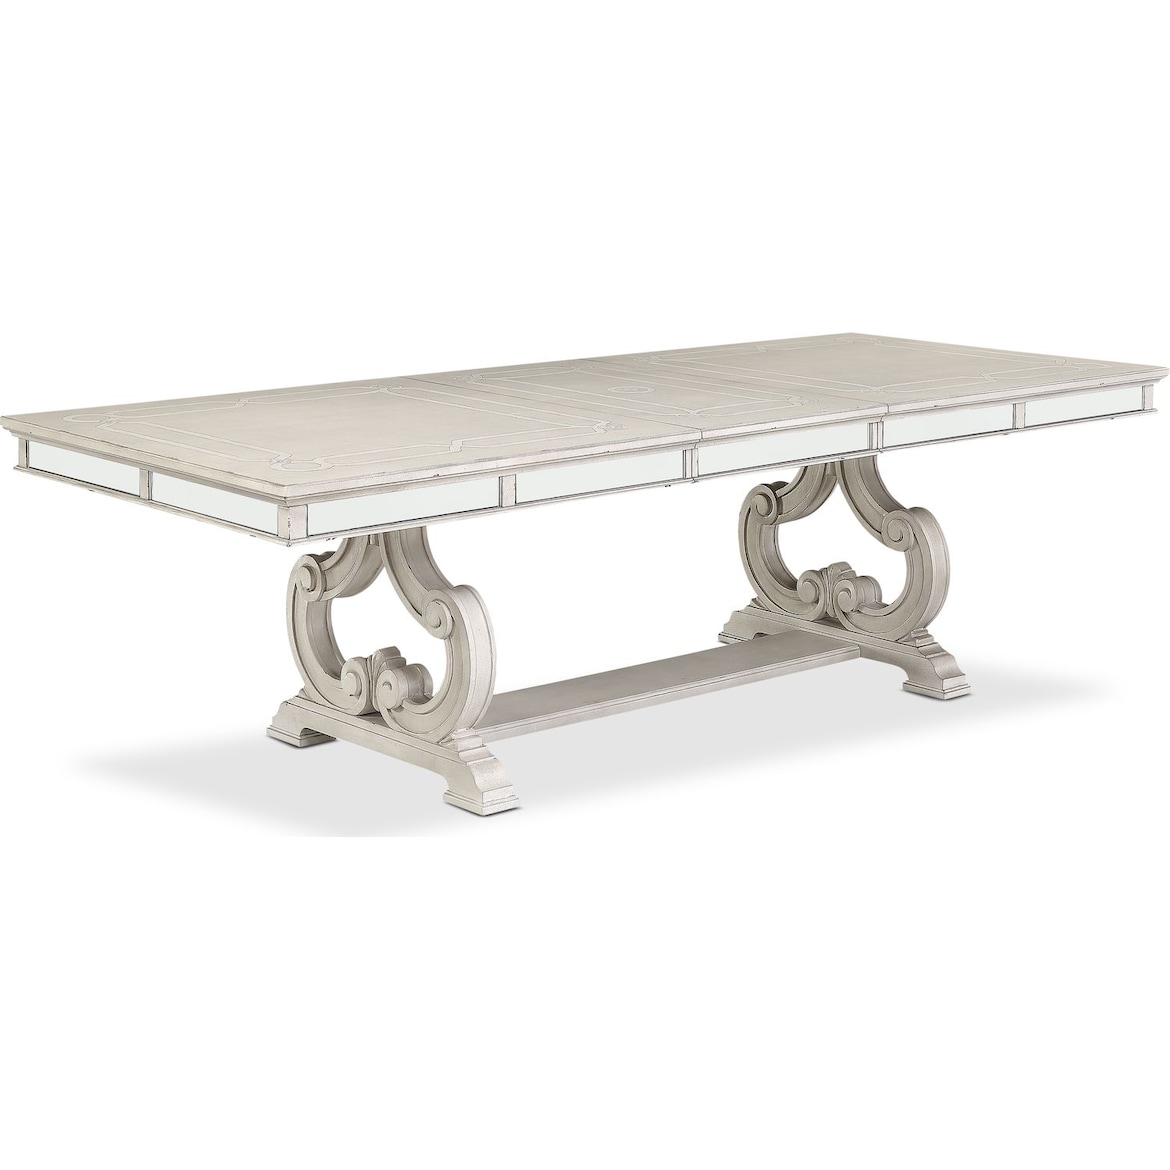 Athena Dining Table | Value City Furniture and Mattresses